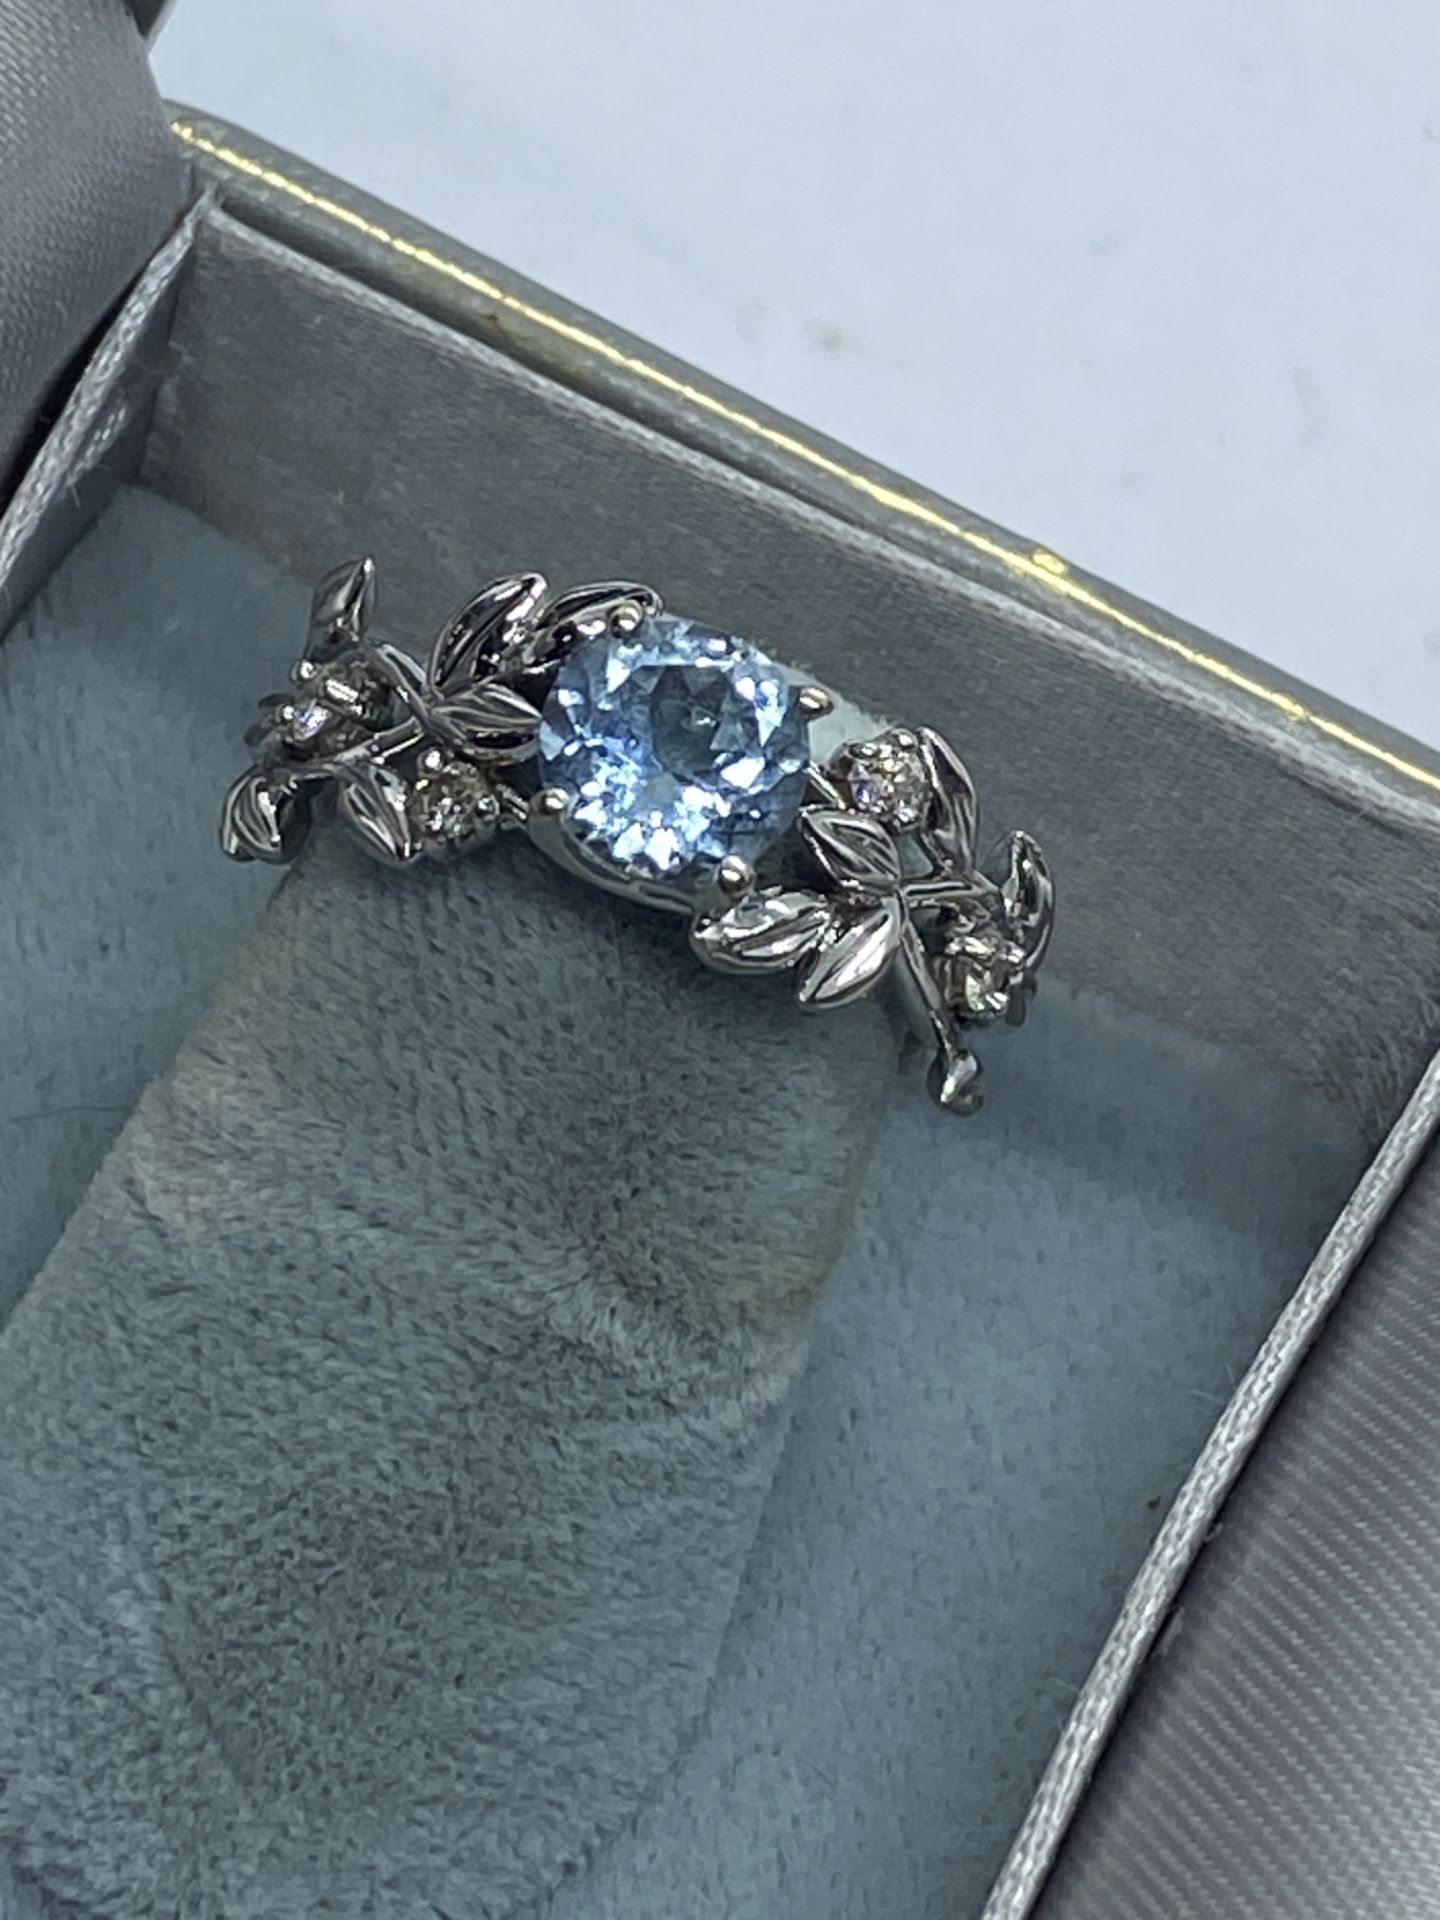 BEAUTIFUL AQUAMARINE & DIAMOND RING IN WHITE METAL TESTED AS 14ct GOLD - Image 4 of 6